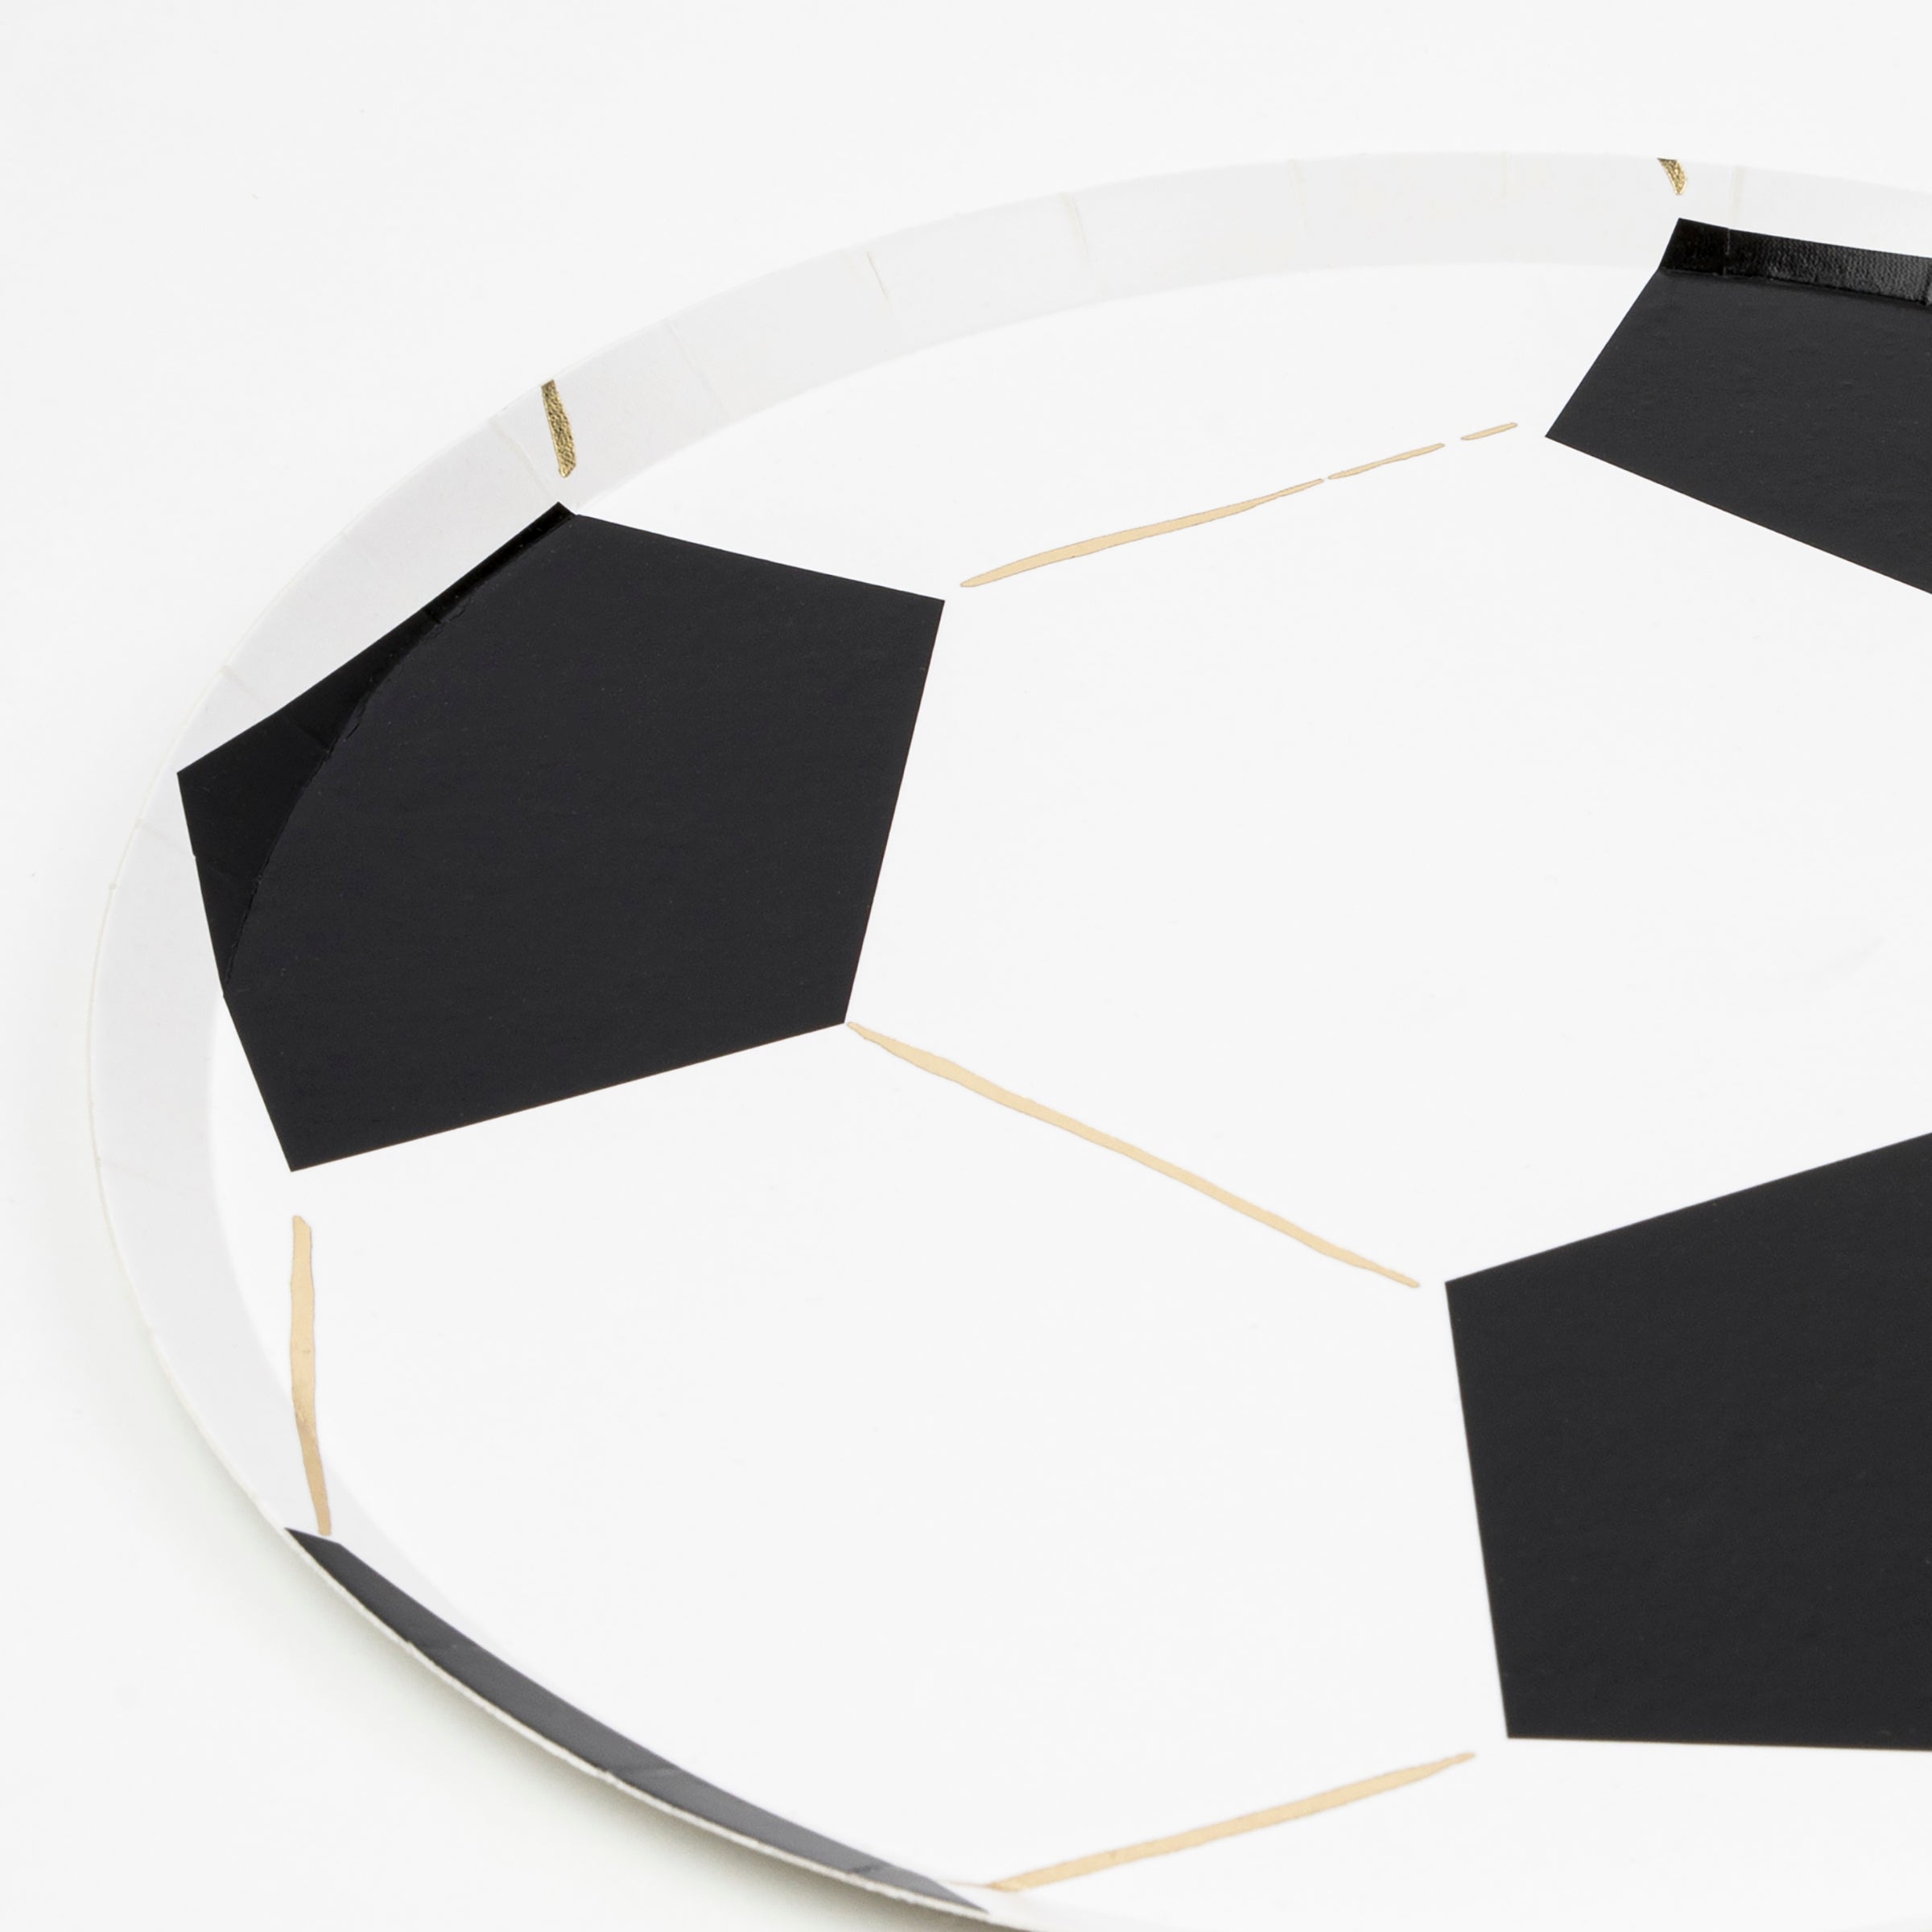 Our paper plates are cut into the shape of a football with fabulous gold foil details.